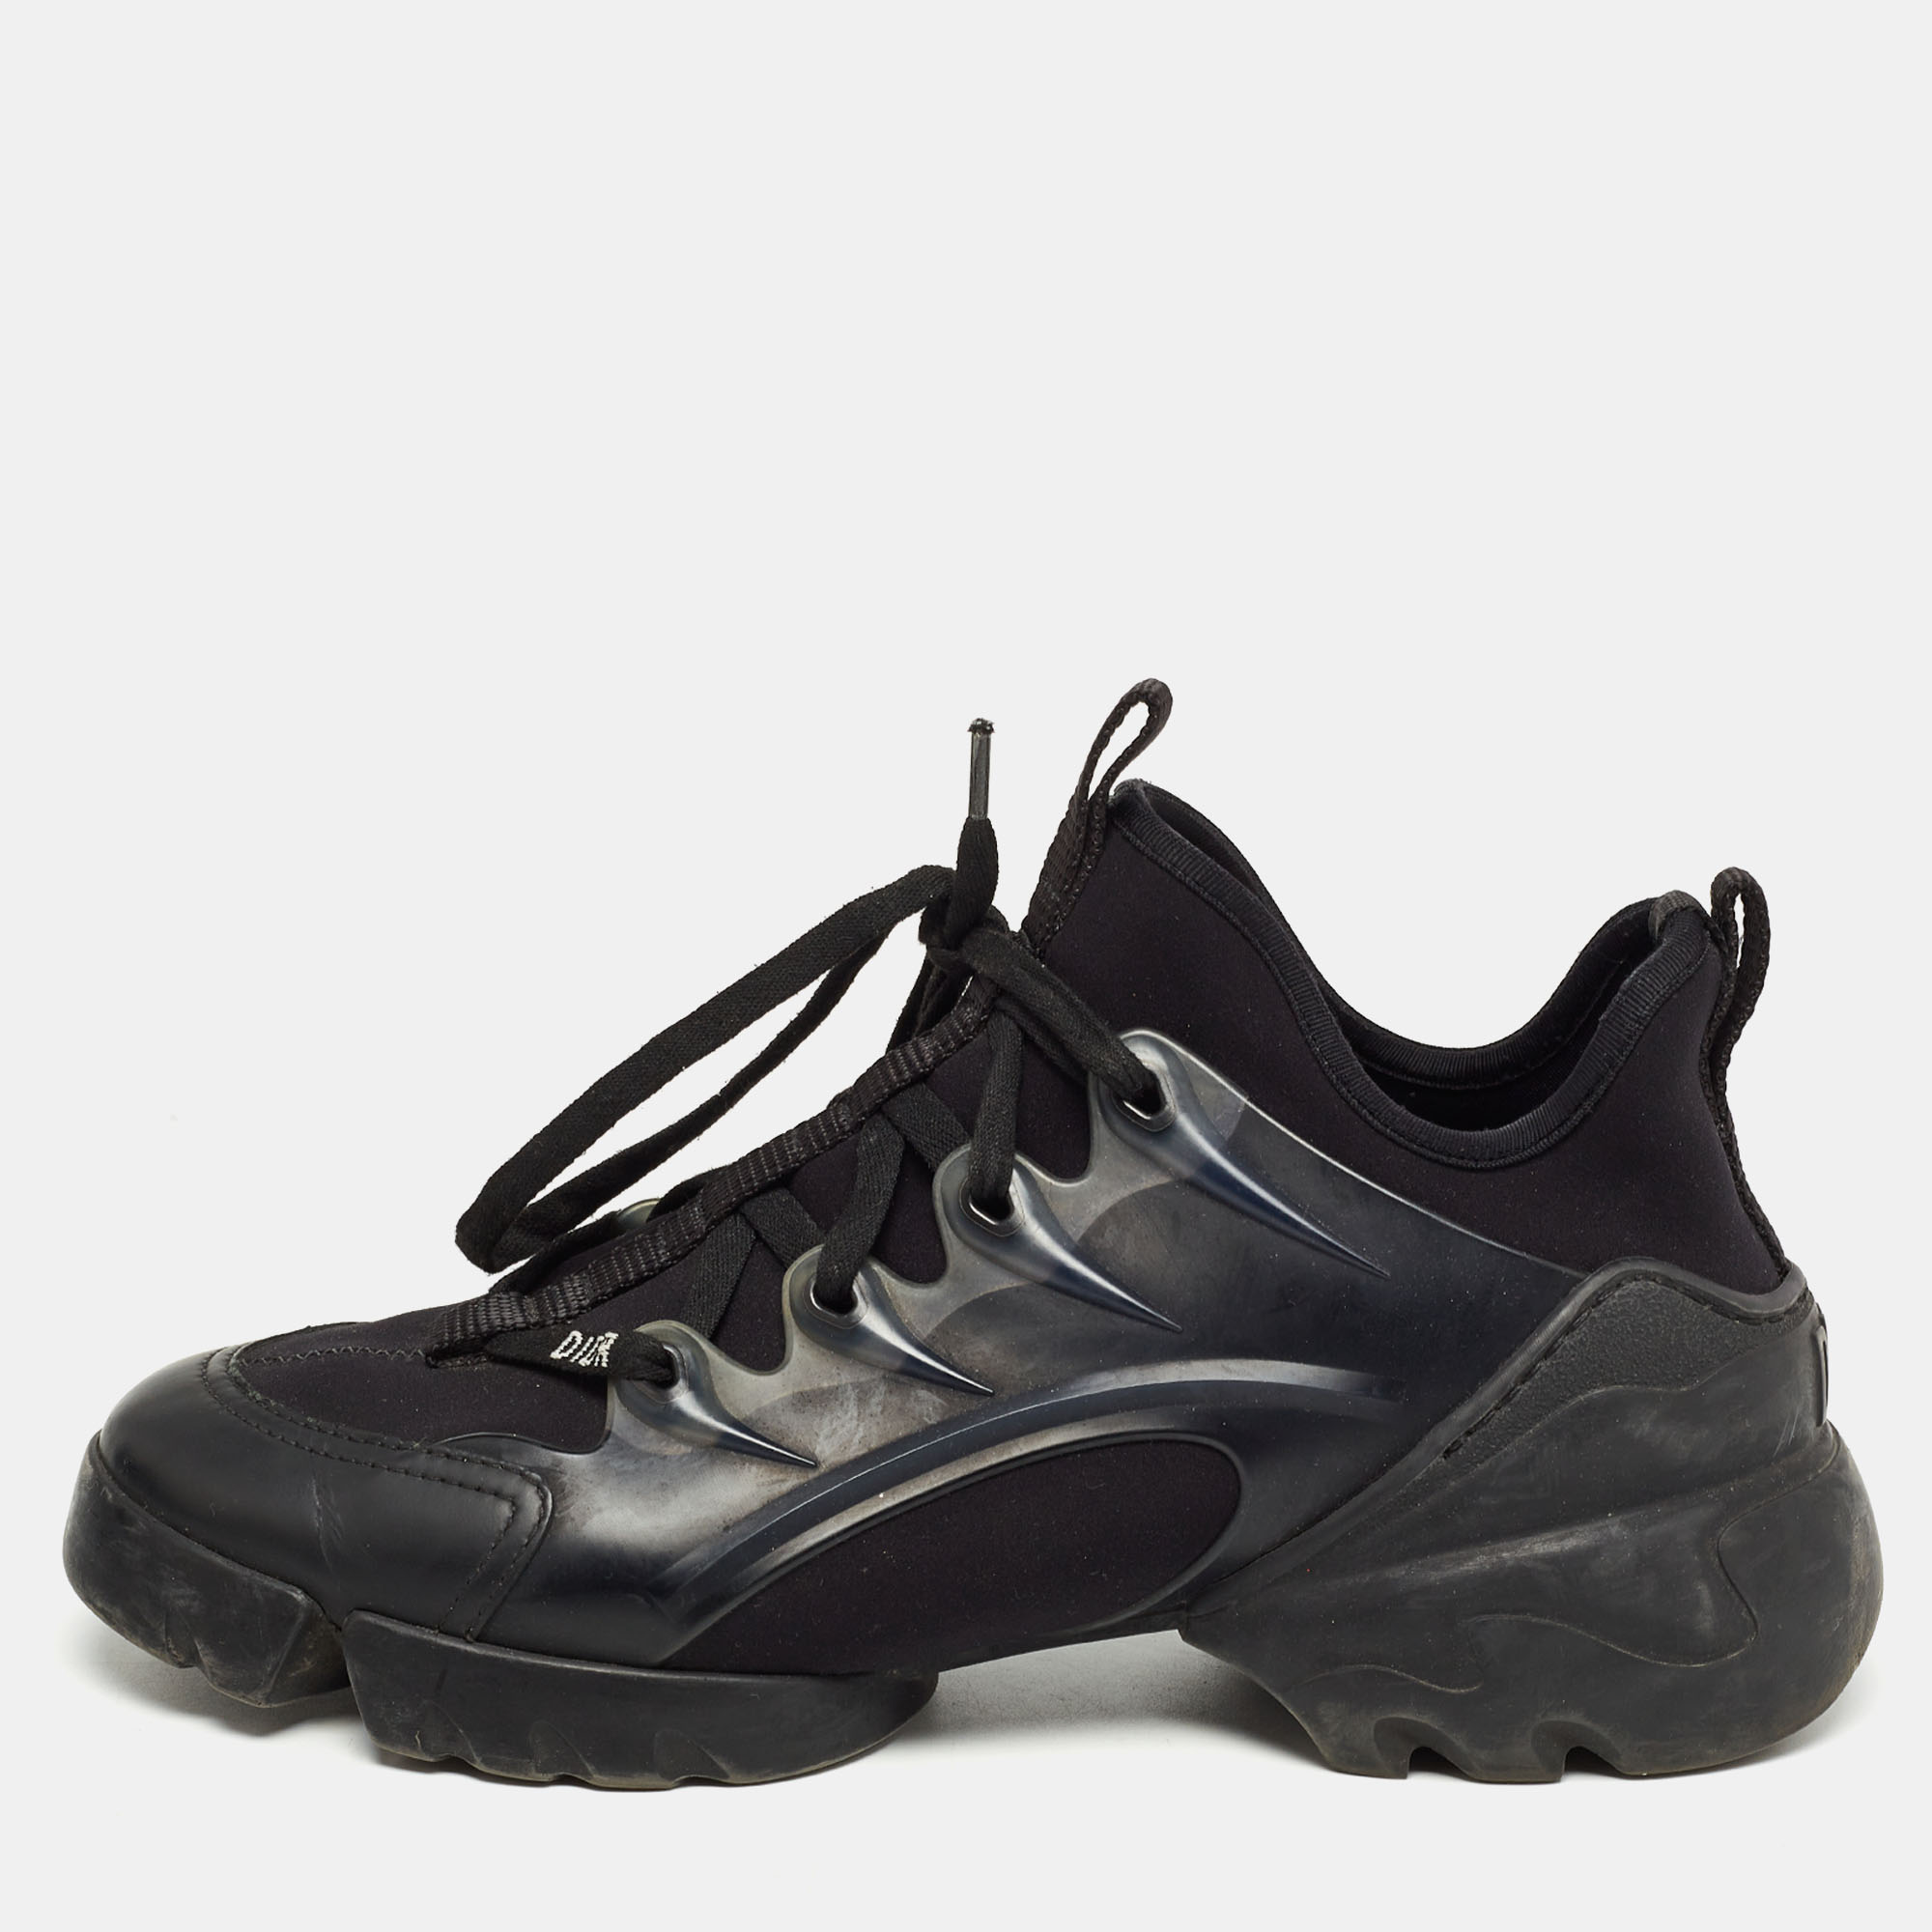 A great pick to elevate your street style look these trendy D Connect sneakers from Dior feature an exterior made of PVC and neoprene into a chunky design with well carved soles. While the brand name on the laces and counters adds a signature touch.